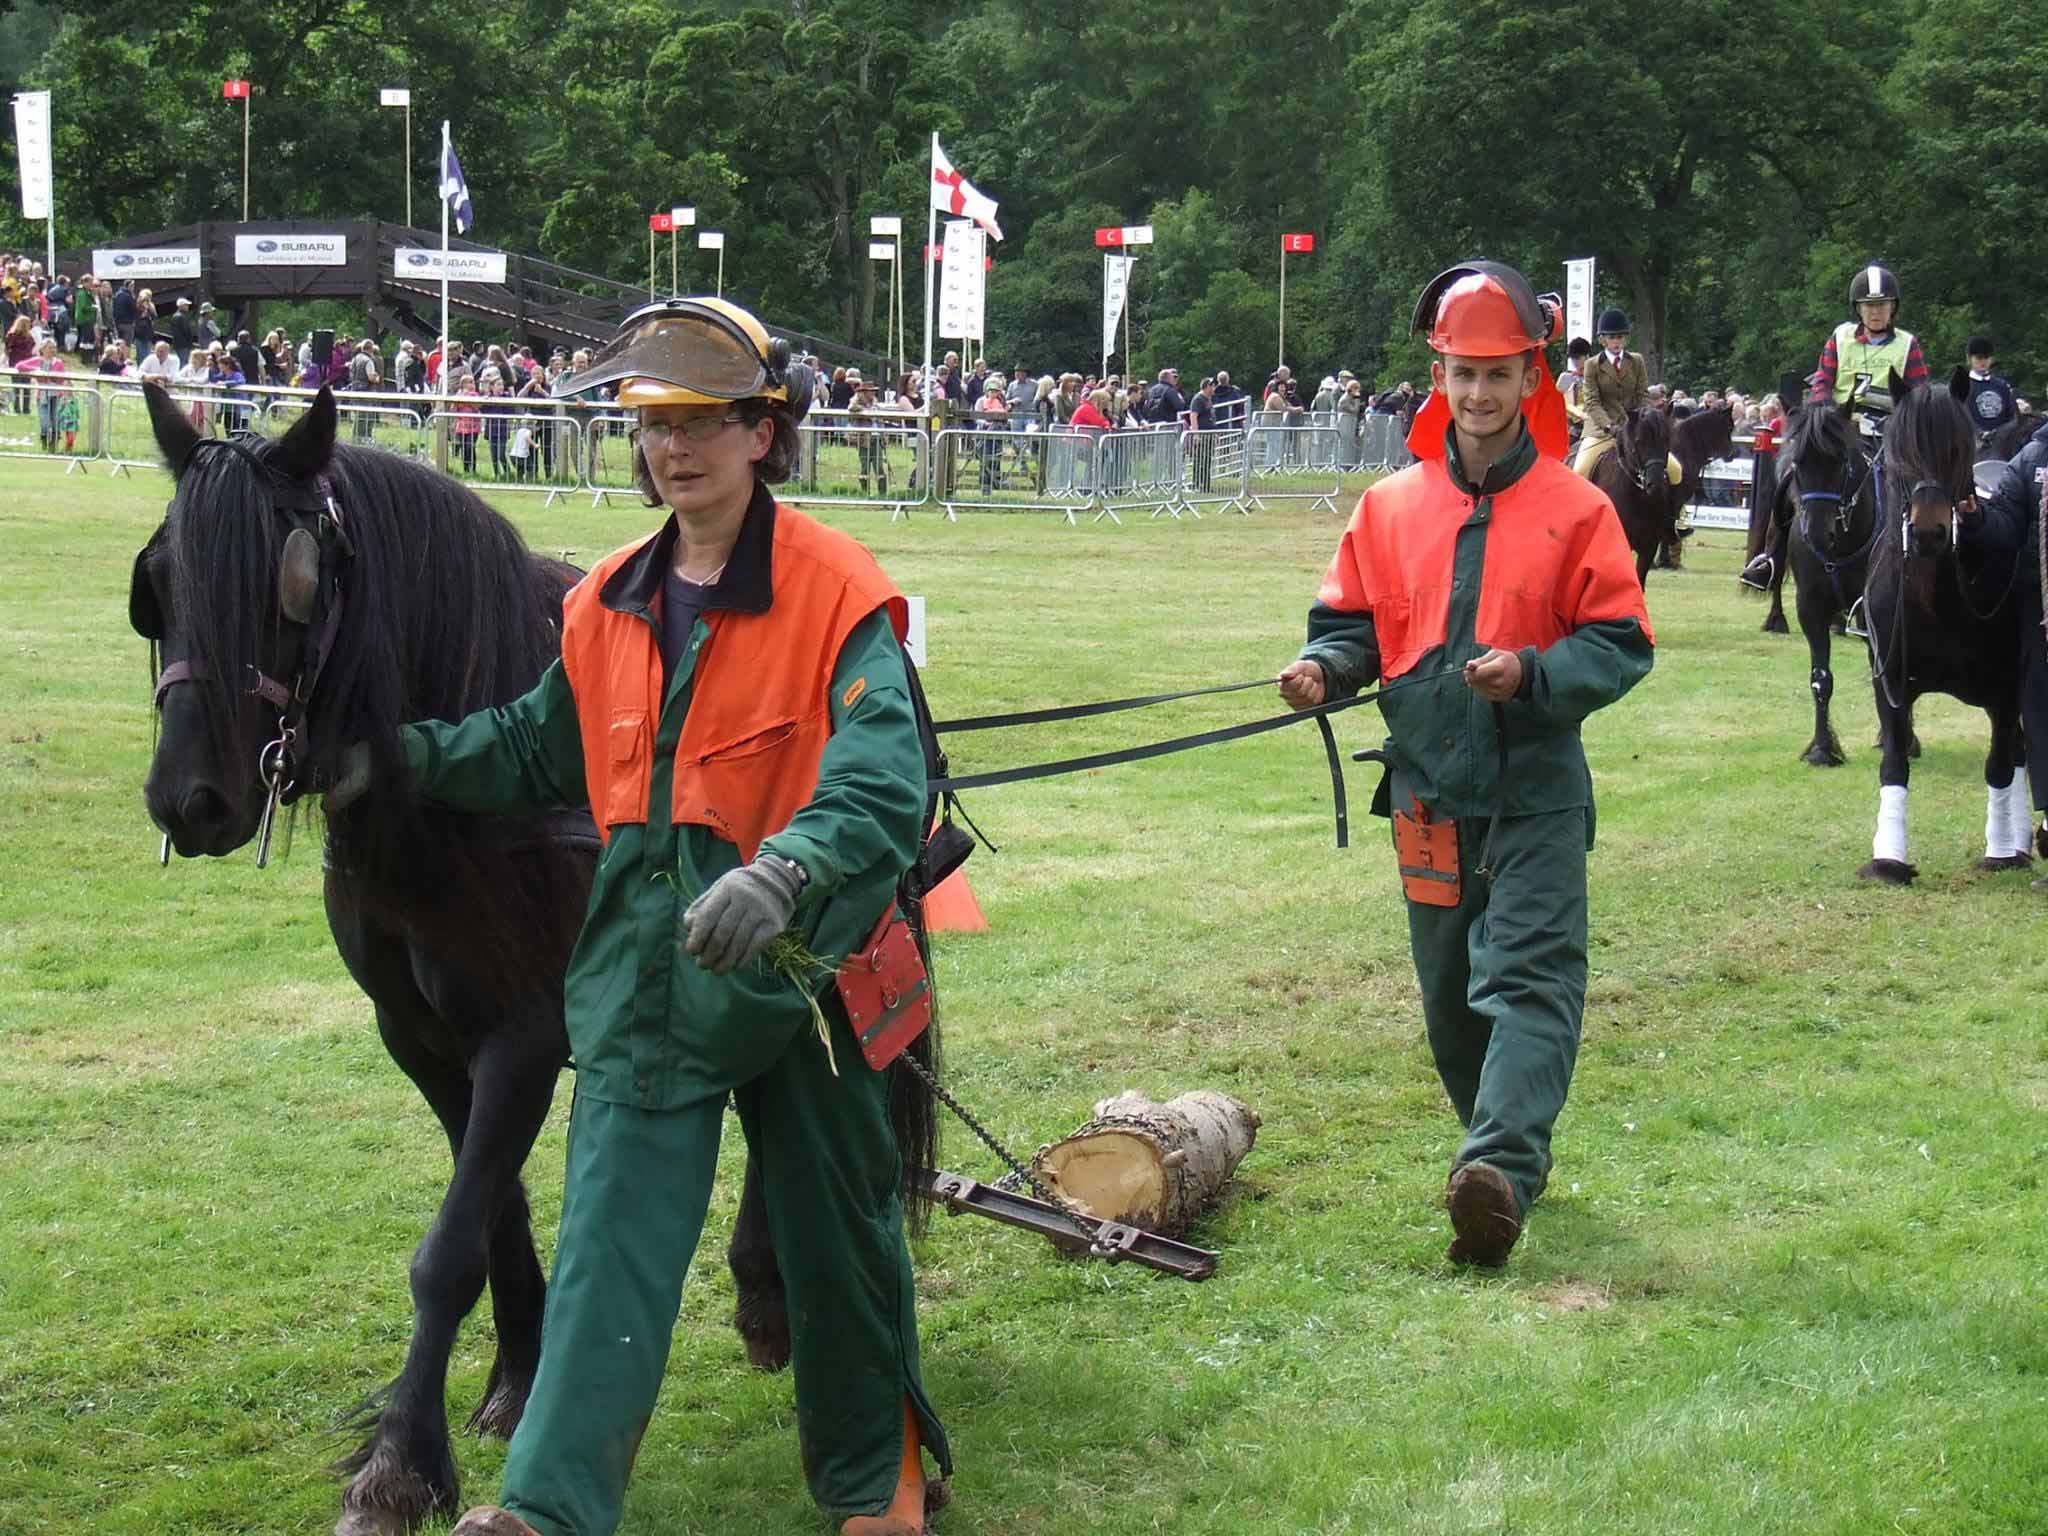 two people in high vis clothing and helmets demonstrate pony pulling logs for forestry work